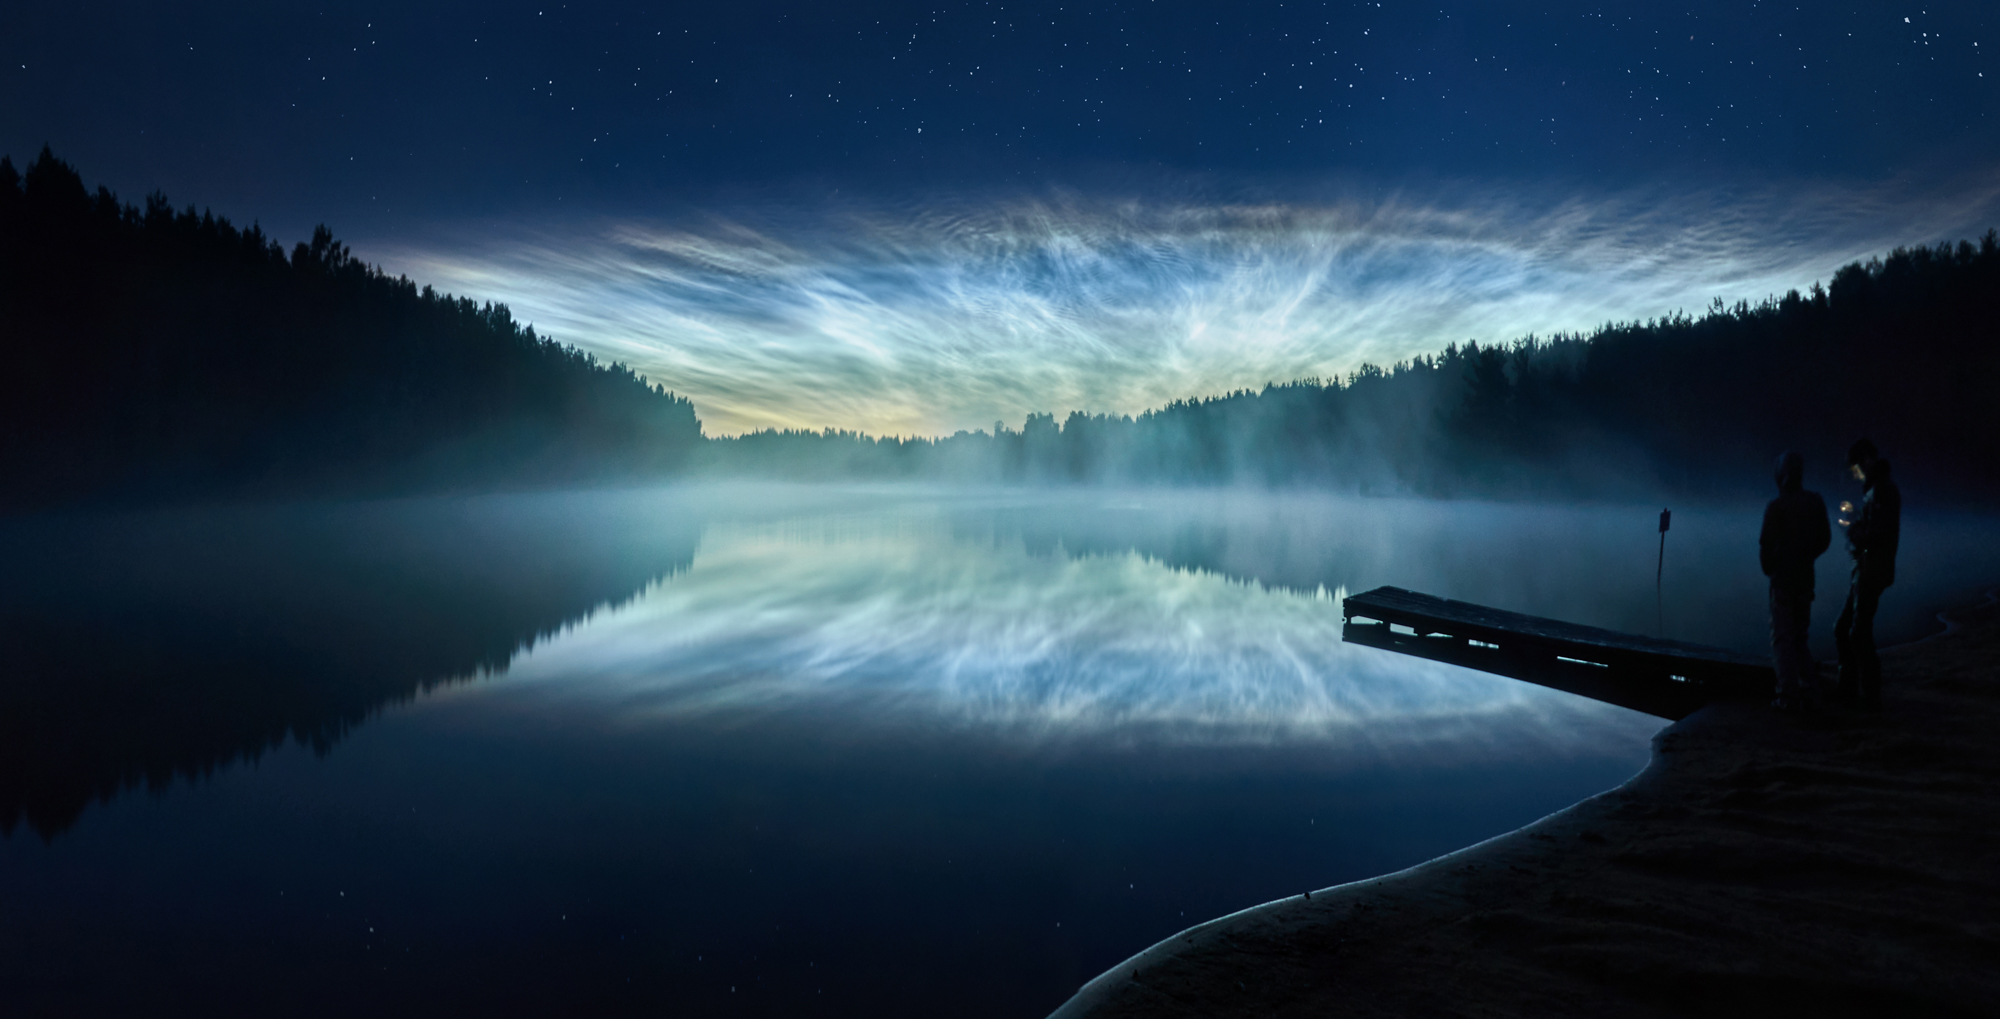 General 2000x1019 nature landscape water night stars lake pier trees forest reflection Russia blue men low light